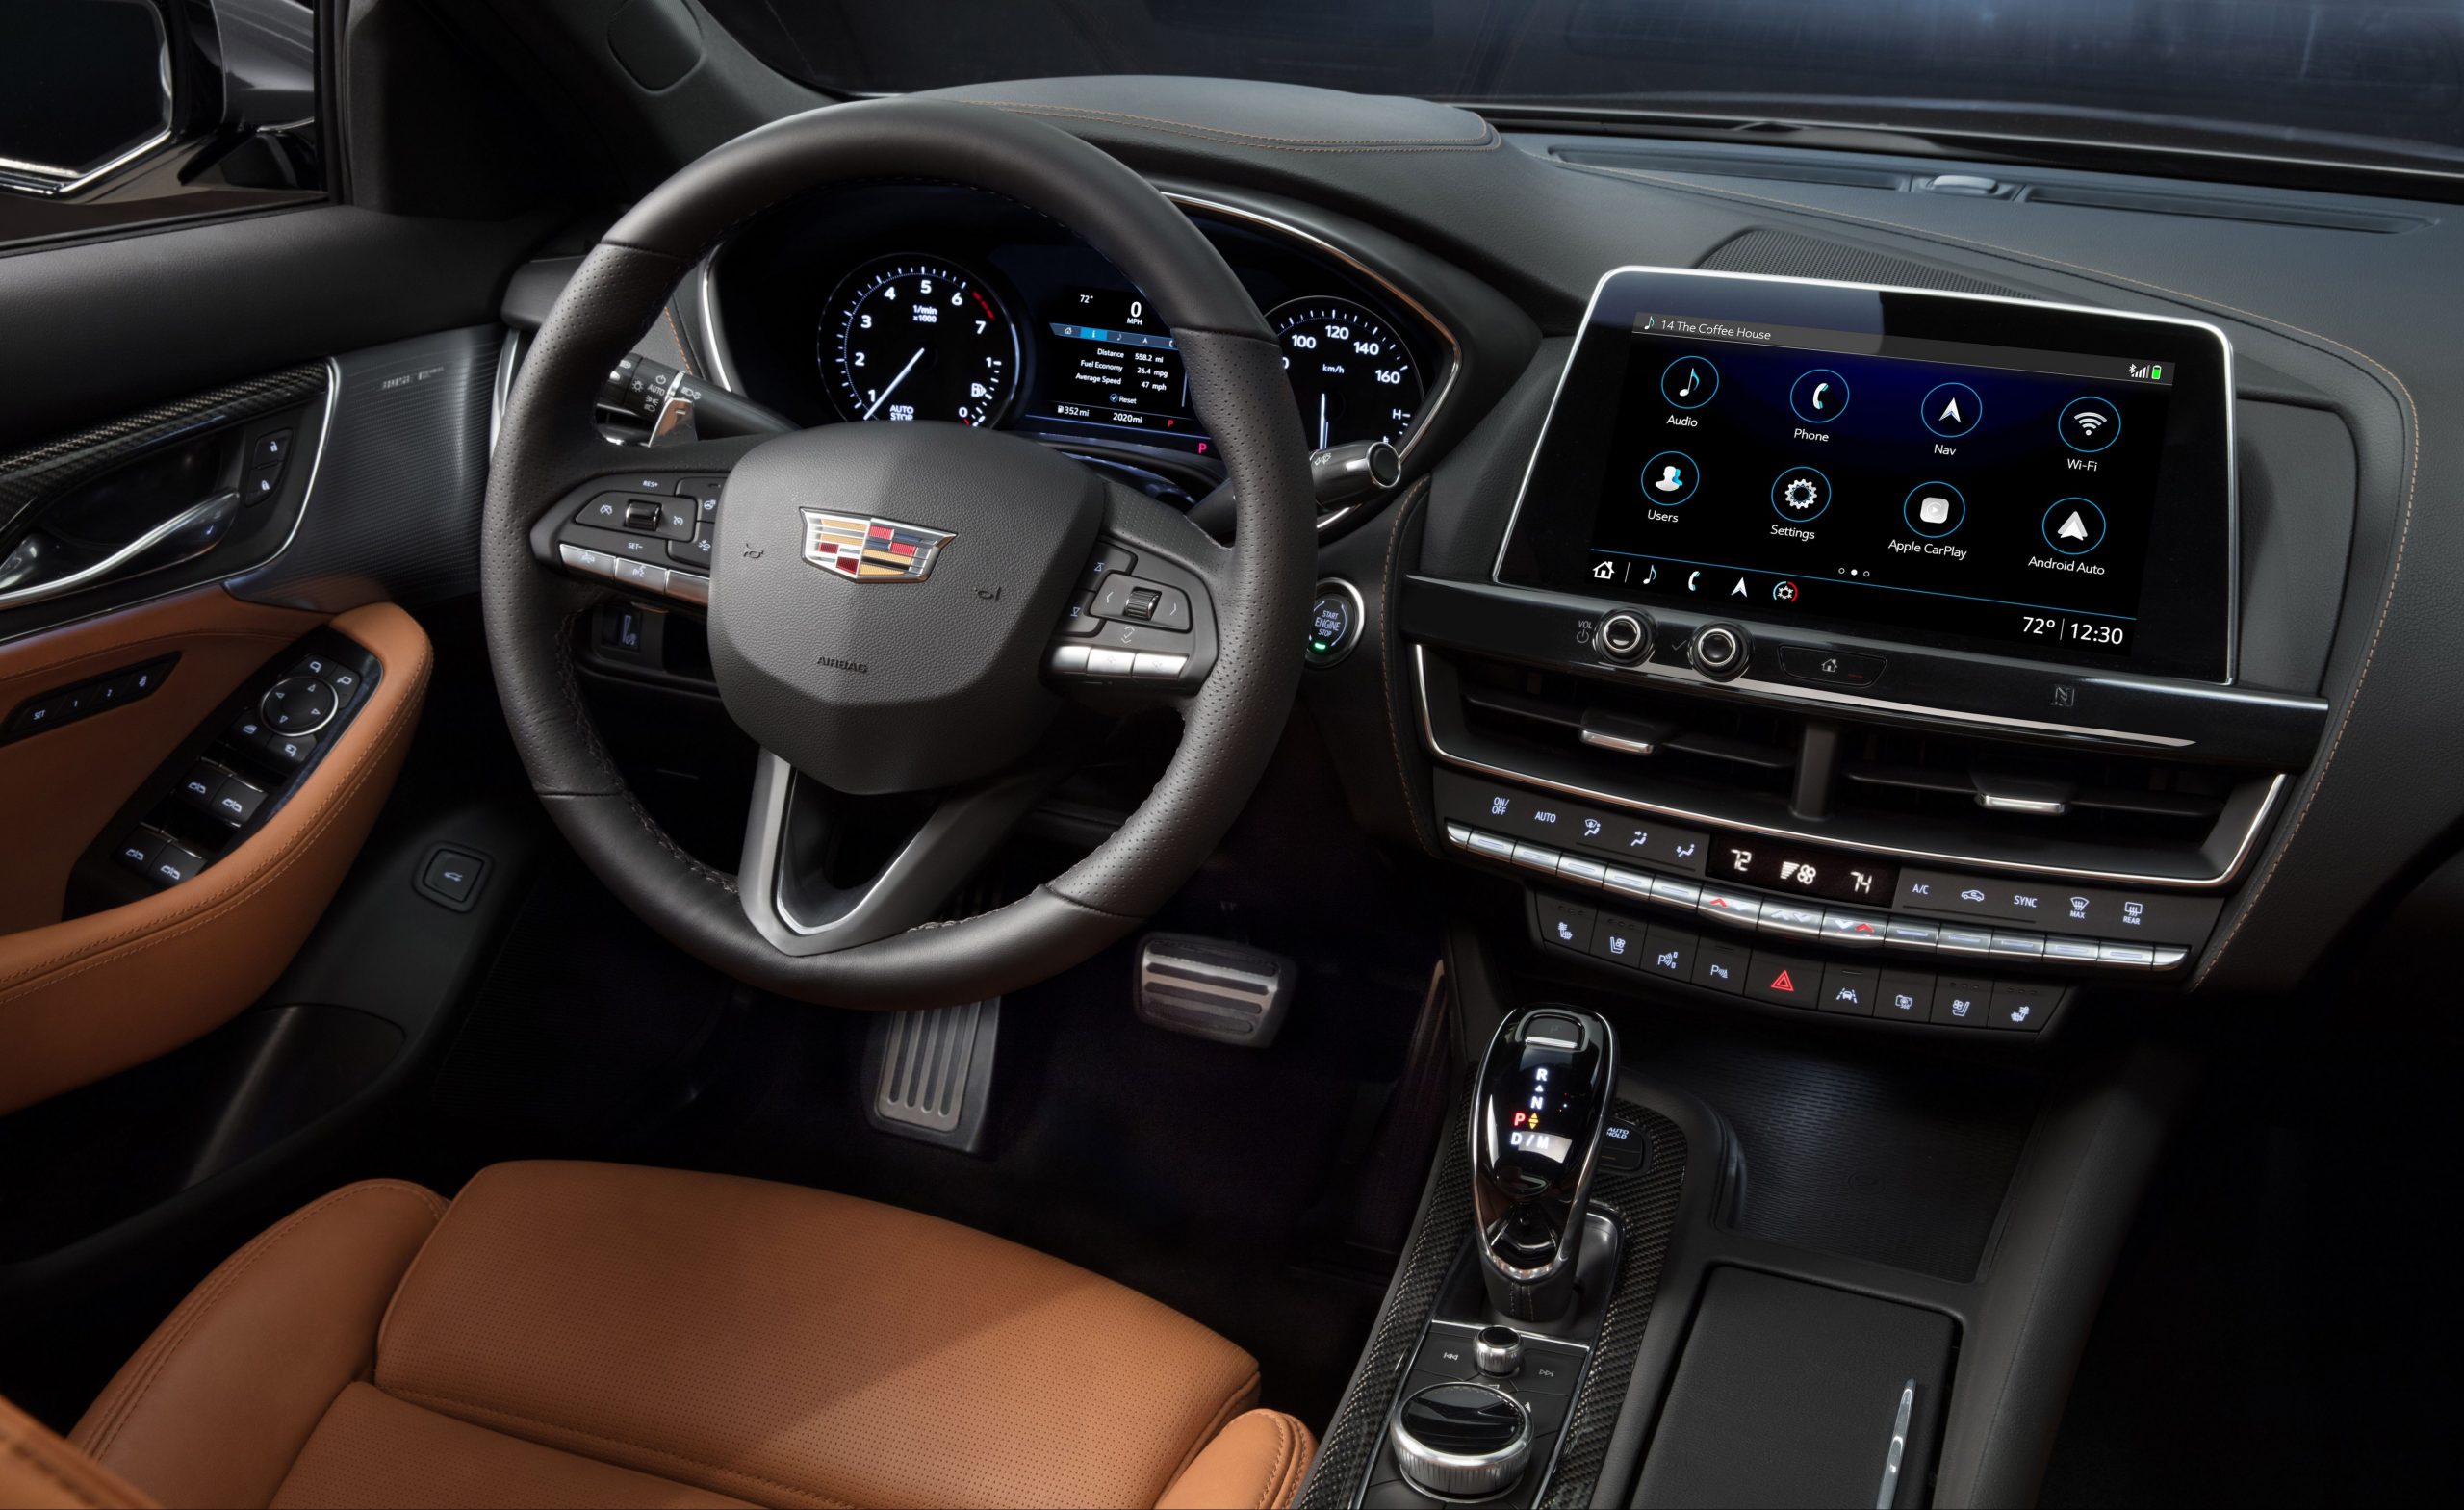 The Story Of 5 Cadillac Ct5 Interior Has Just Gone Viral!